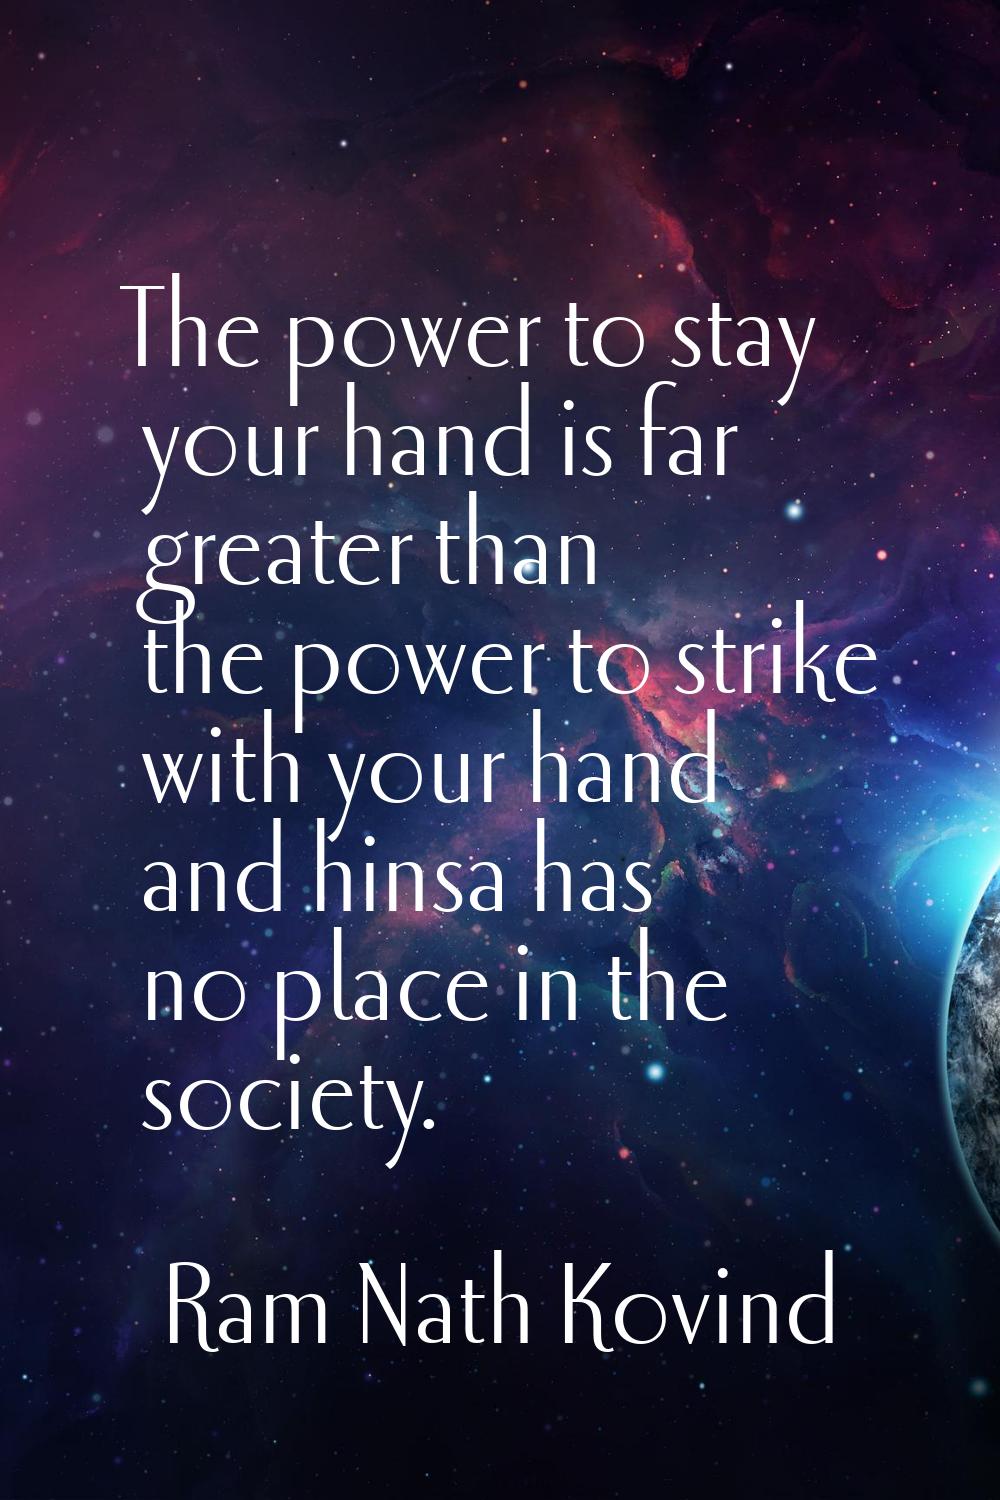 The power to stay your hand is far greater than the power to strike with your hand and hinsa has no